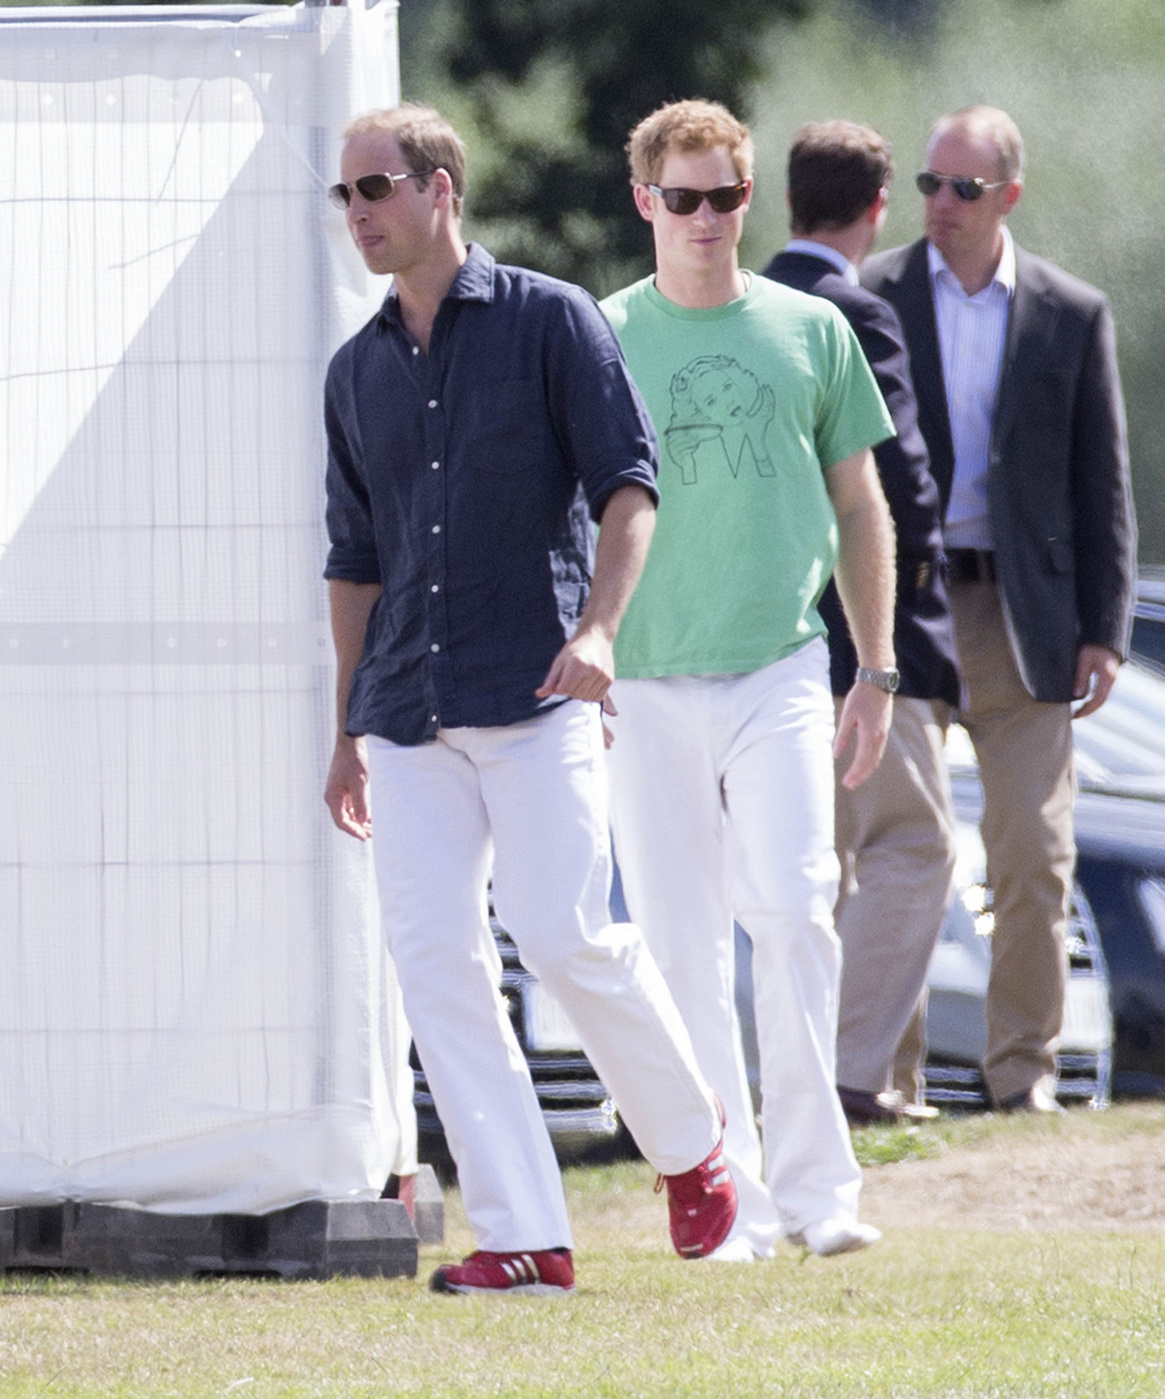 Well Played, Mostly, Princes William and Harry